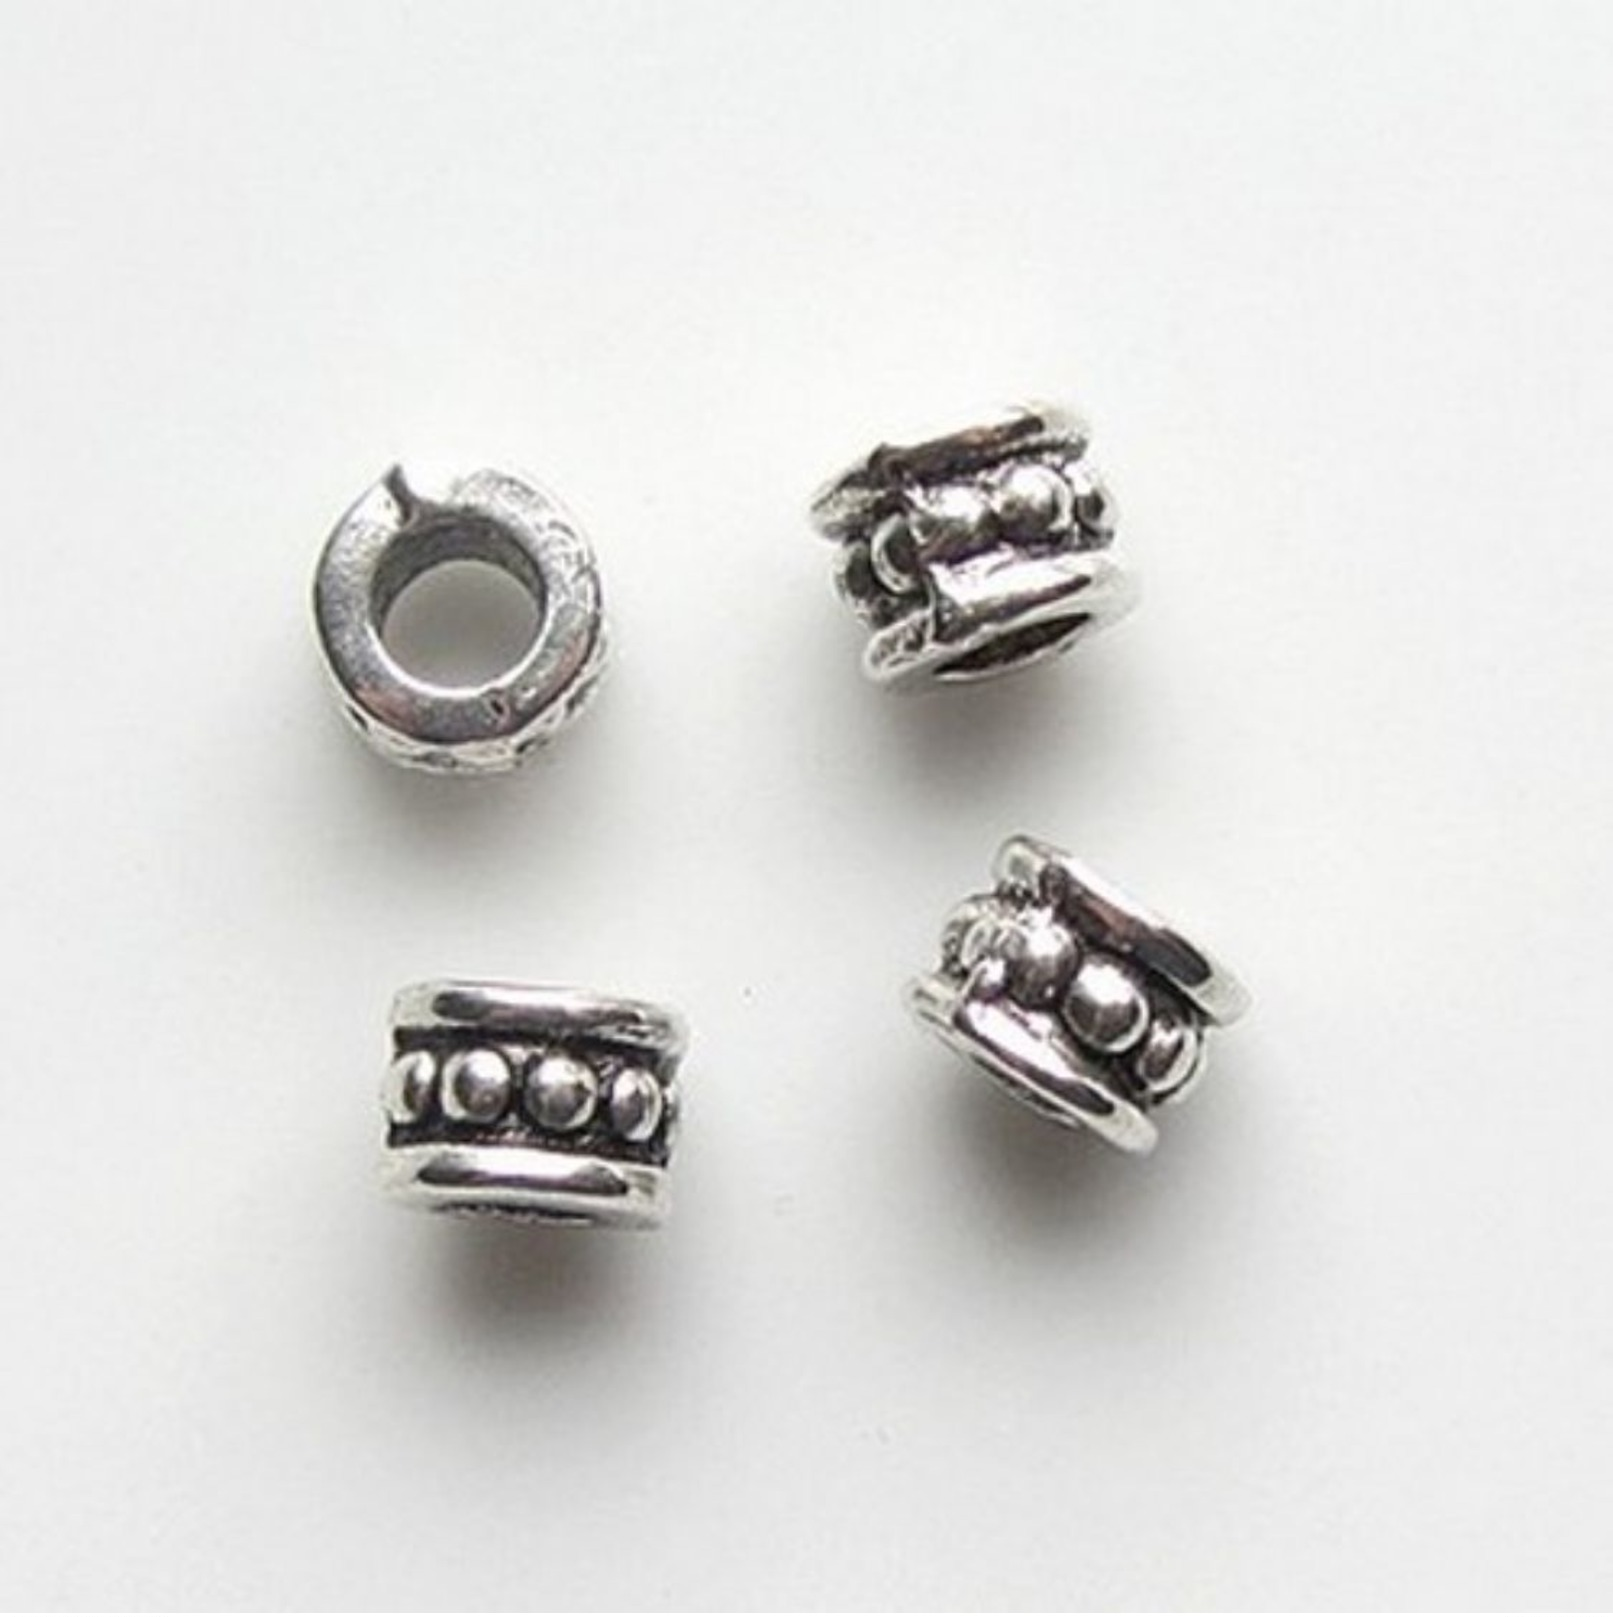 10 Perles Intercalaire Spacer _ CYLINDRE 4.5x6x6mm _ Apprêts Création Bijoux _ A152 - Pearls